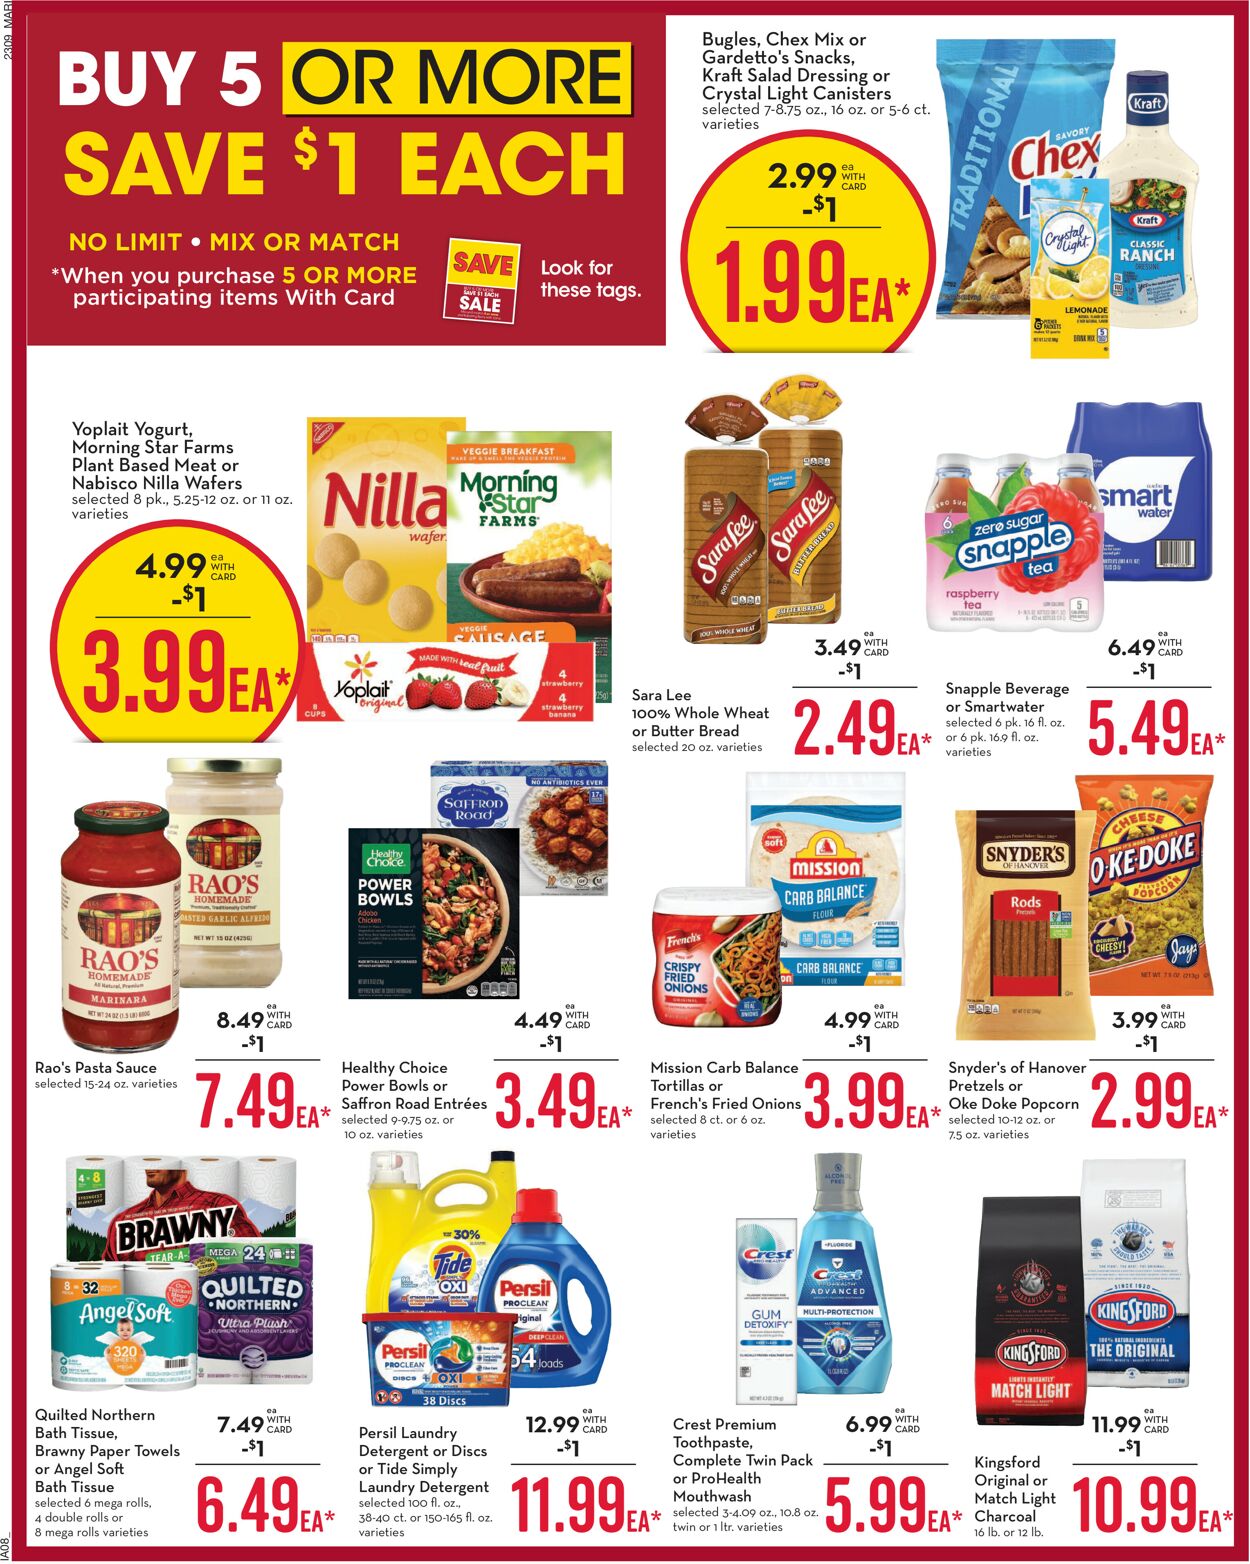 Mariano’s Ad from 03/29/2023